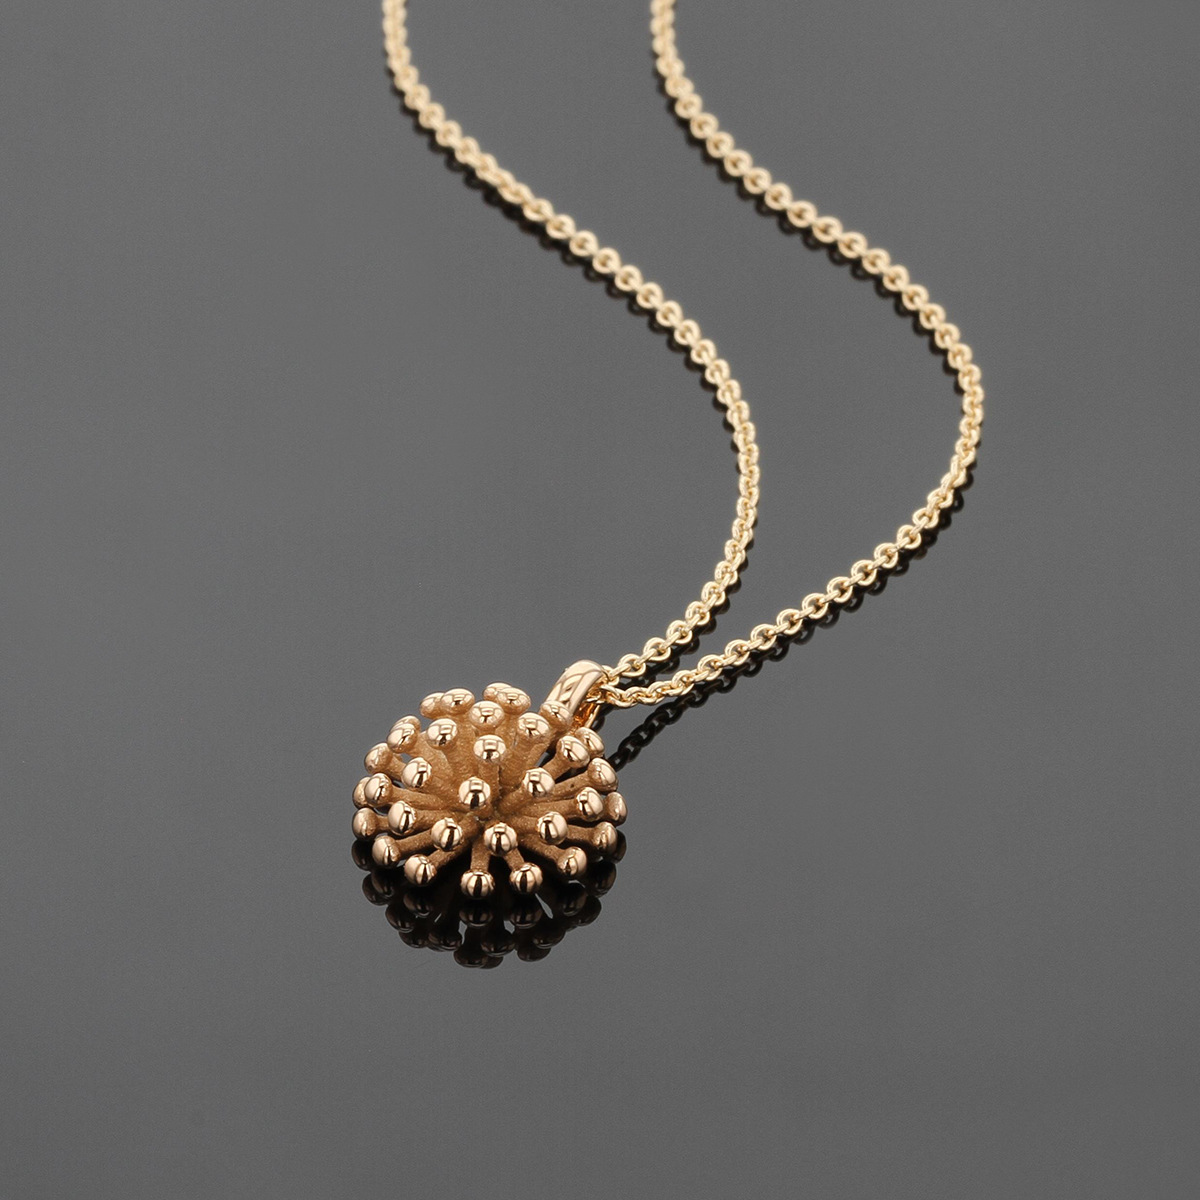 18ct rose gold pendant in the form of a dandelion flower.